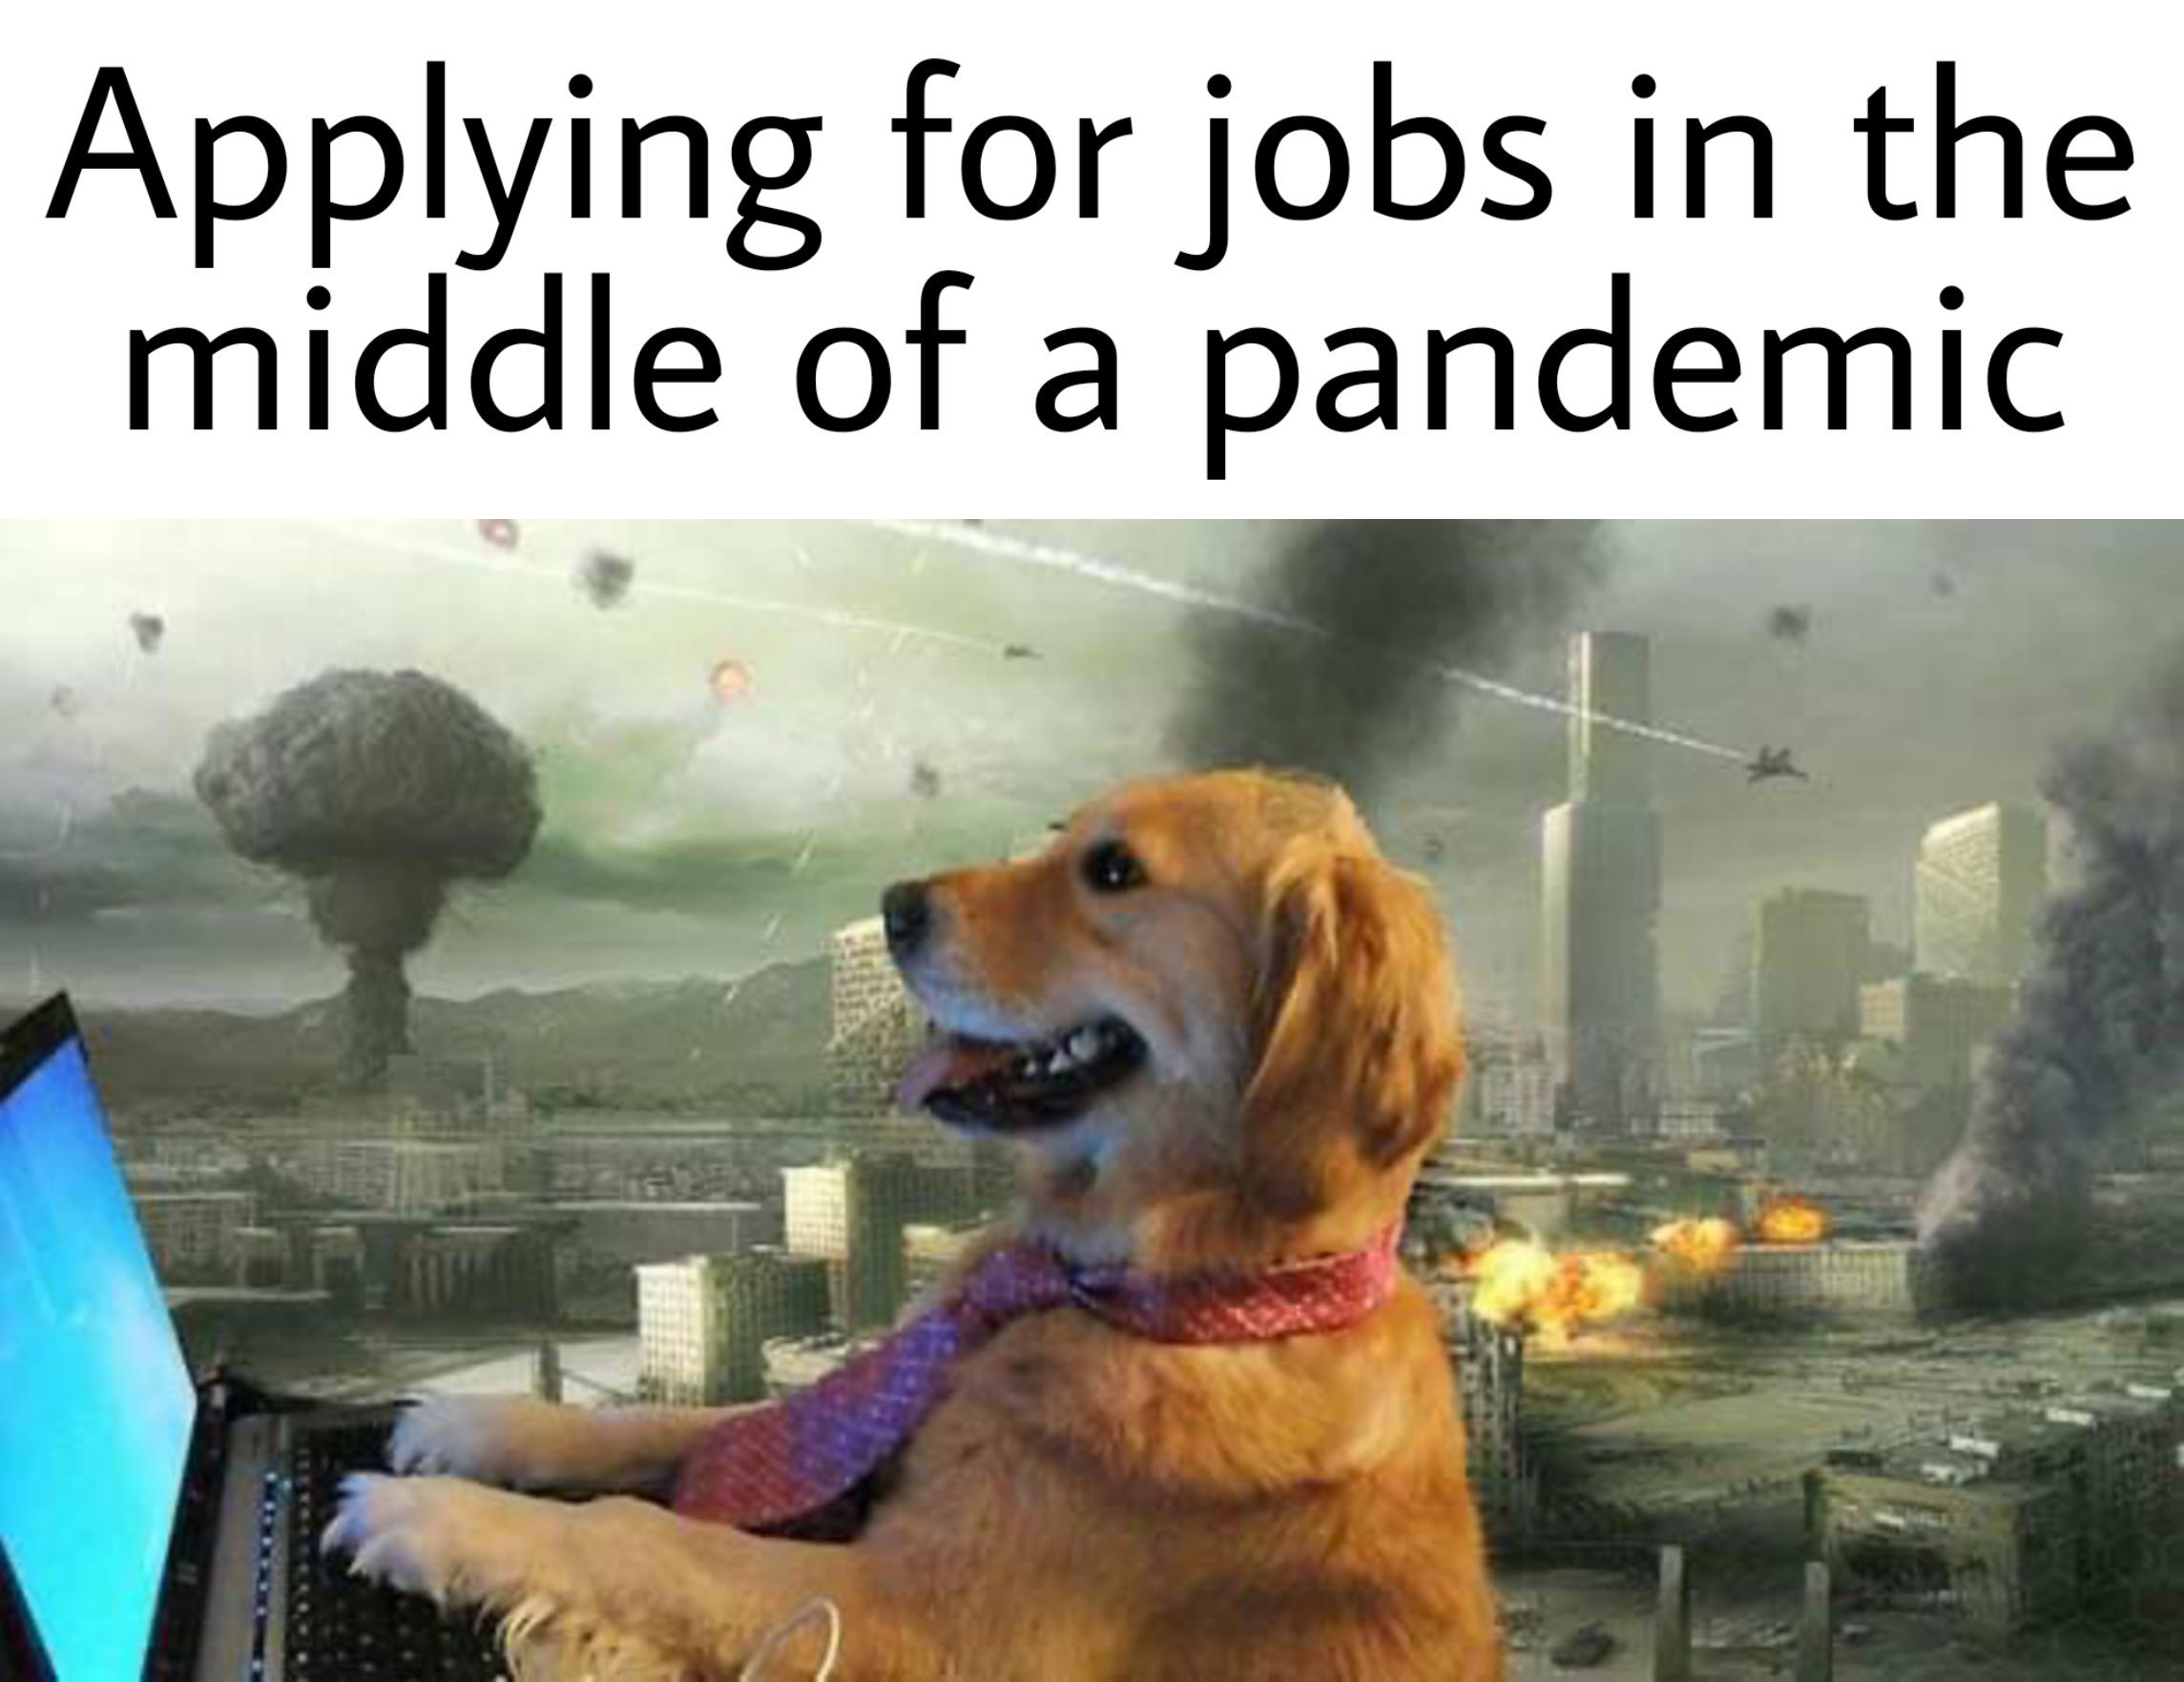 Applying for jobs in the middle of a pandemic